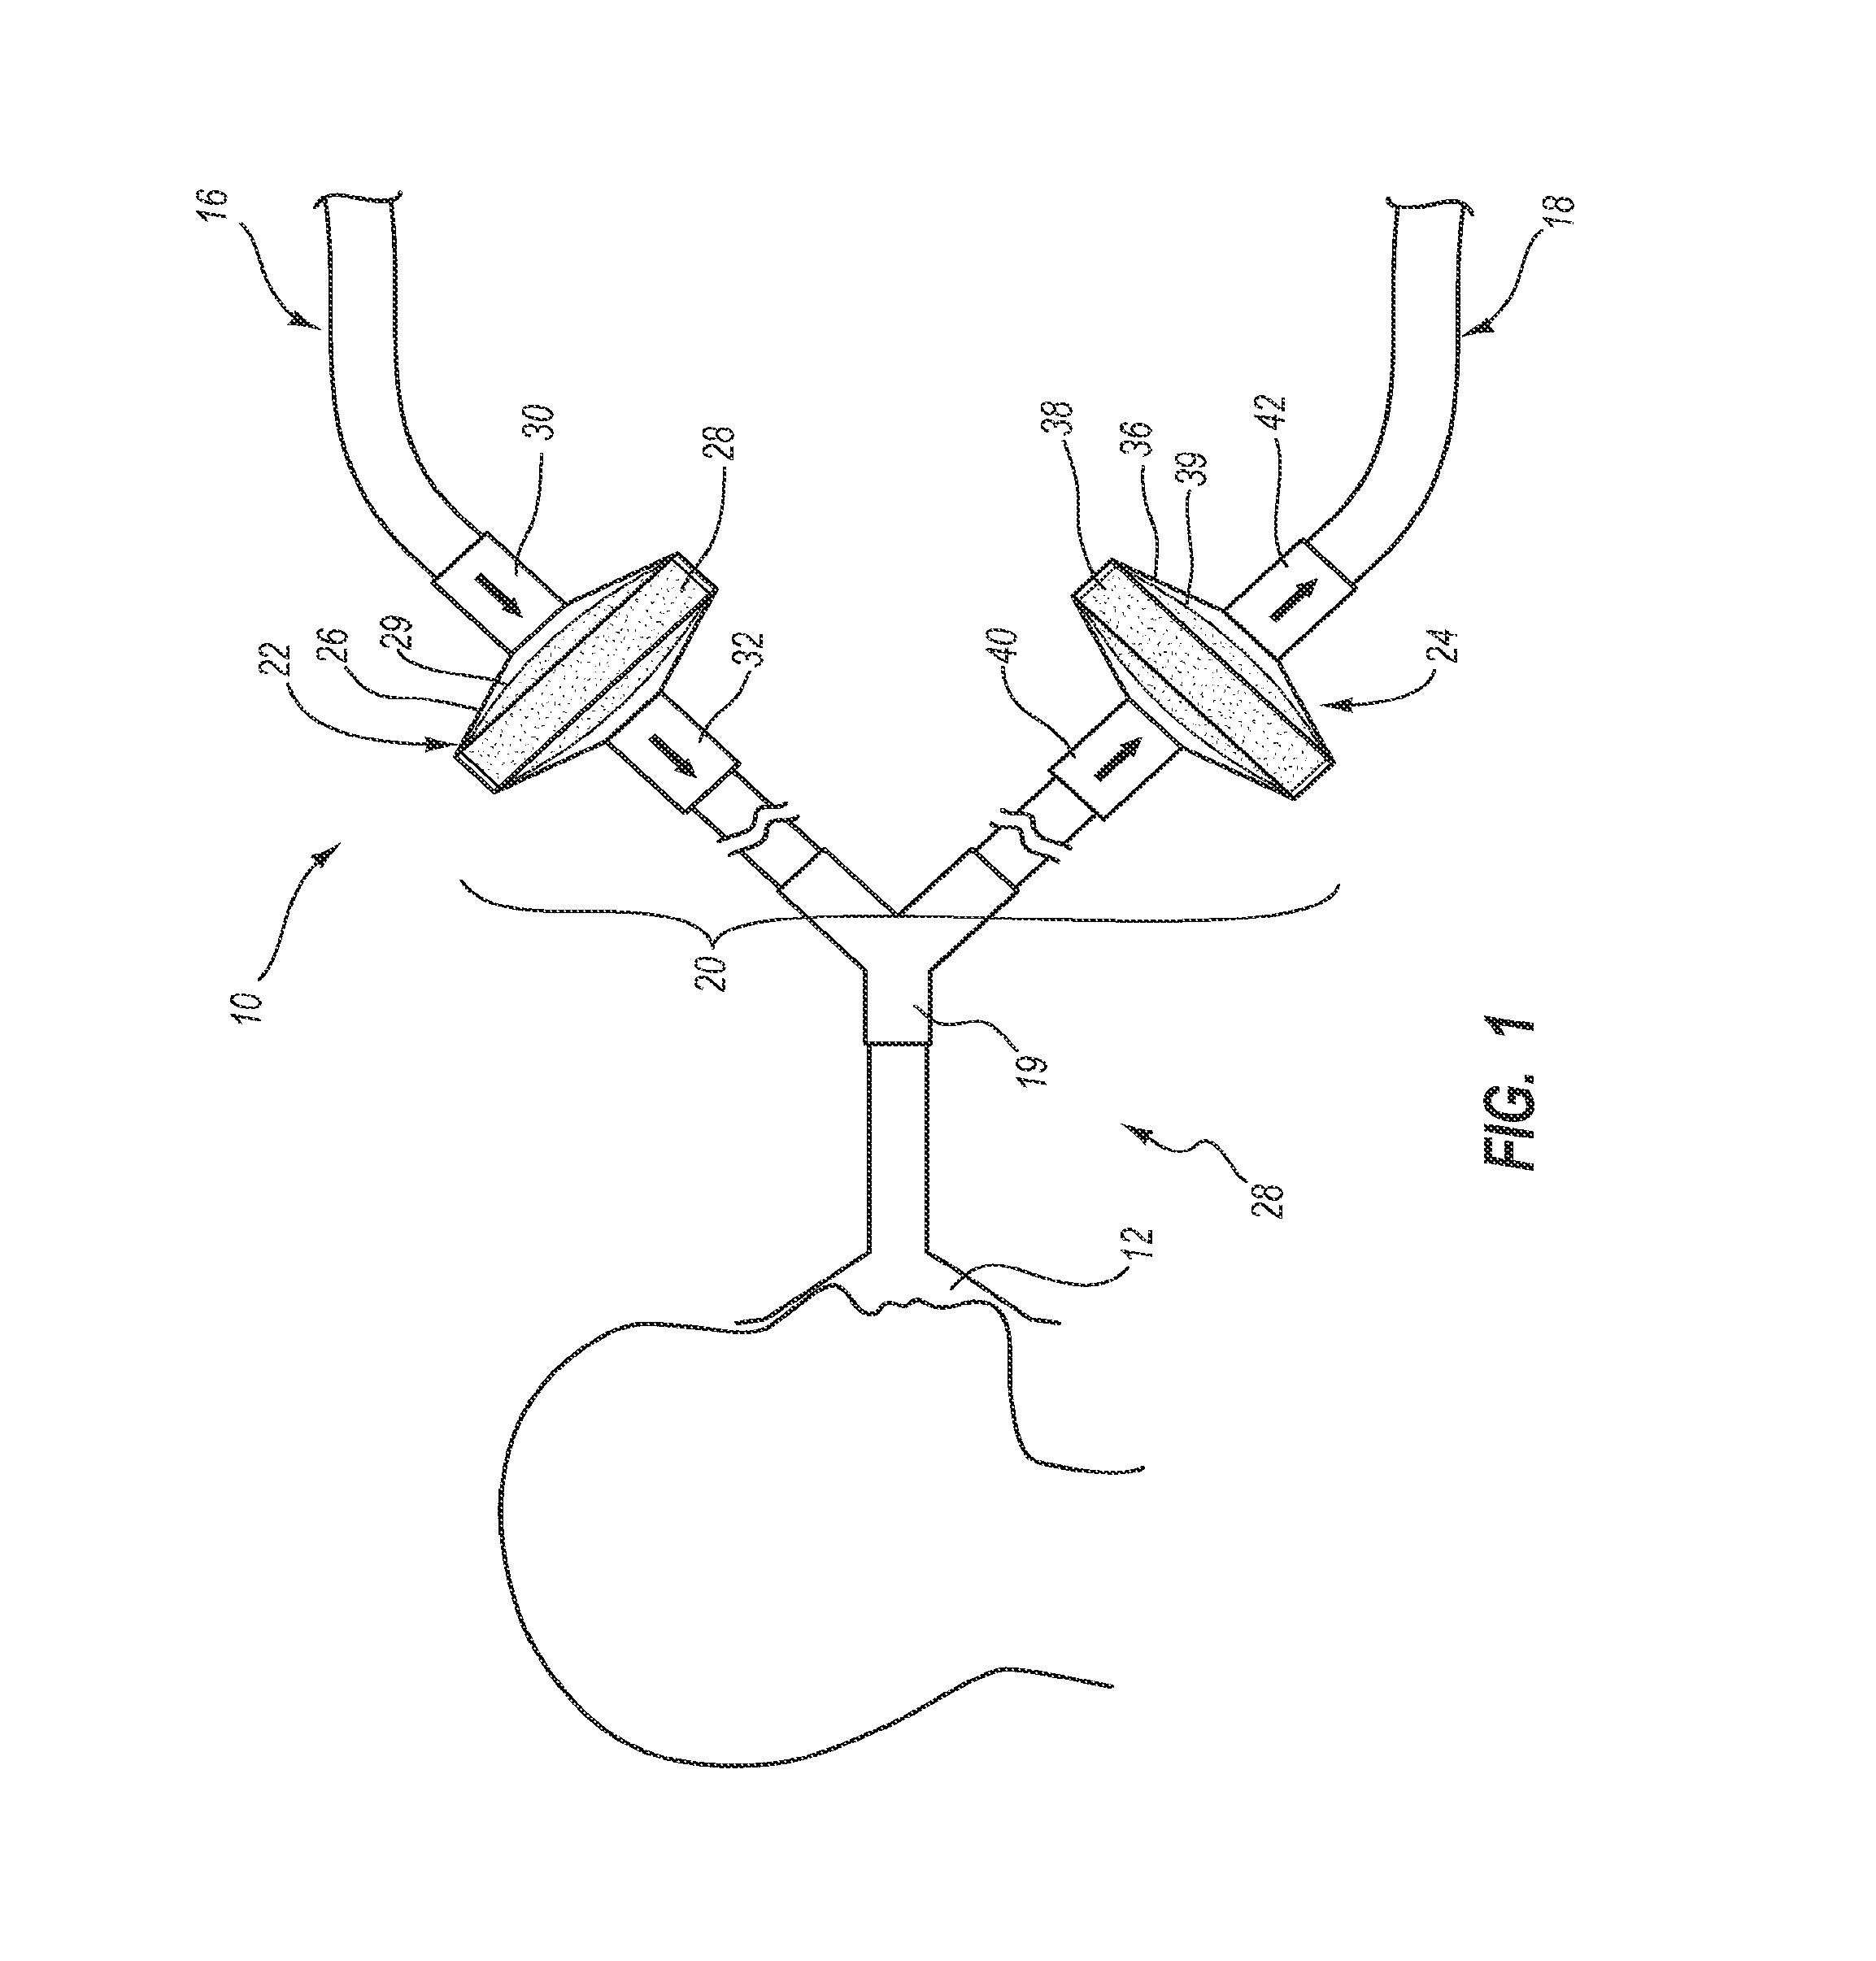 System, Method and Apparatus for Removal of Volatile Anesthetics for Malignant Hyperthermia